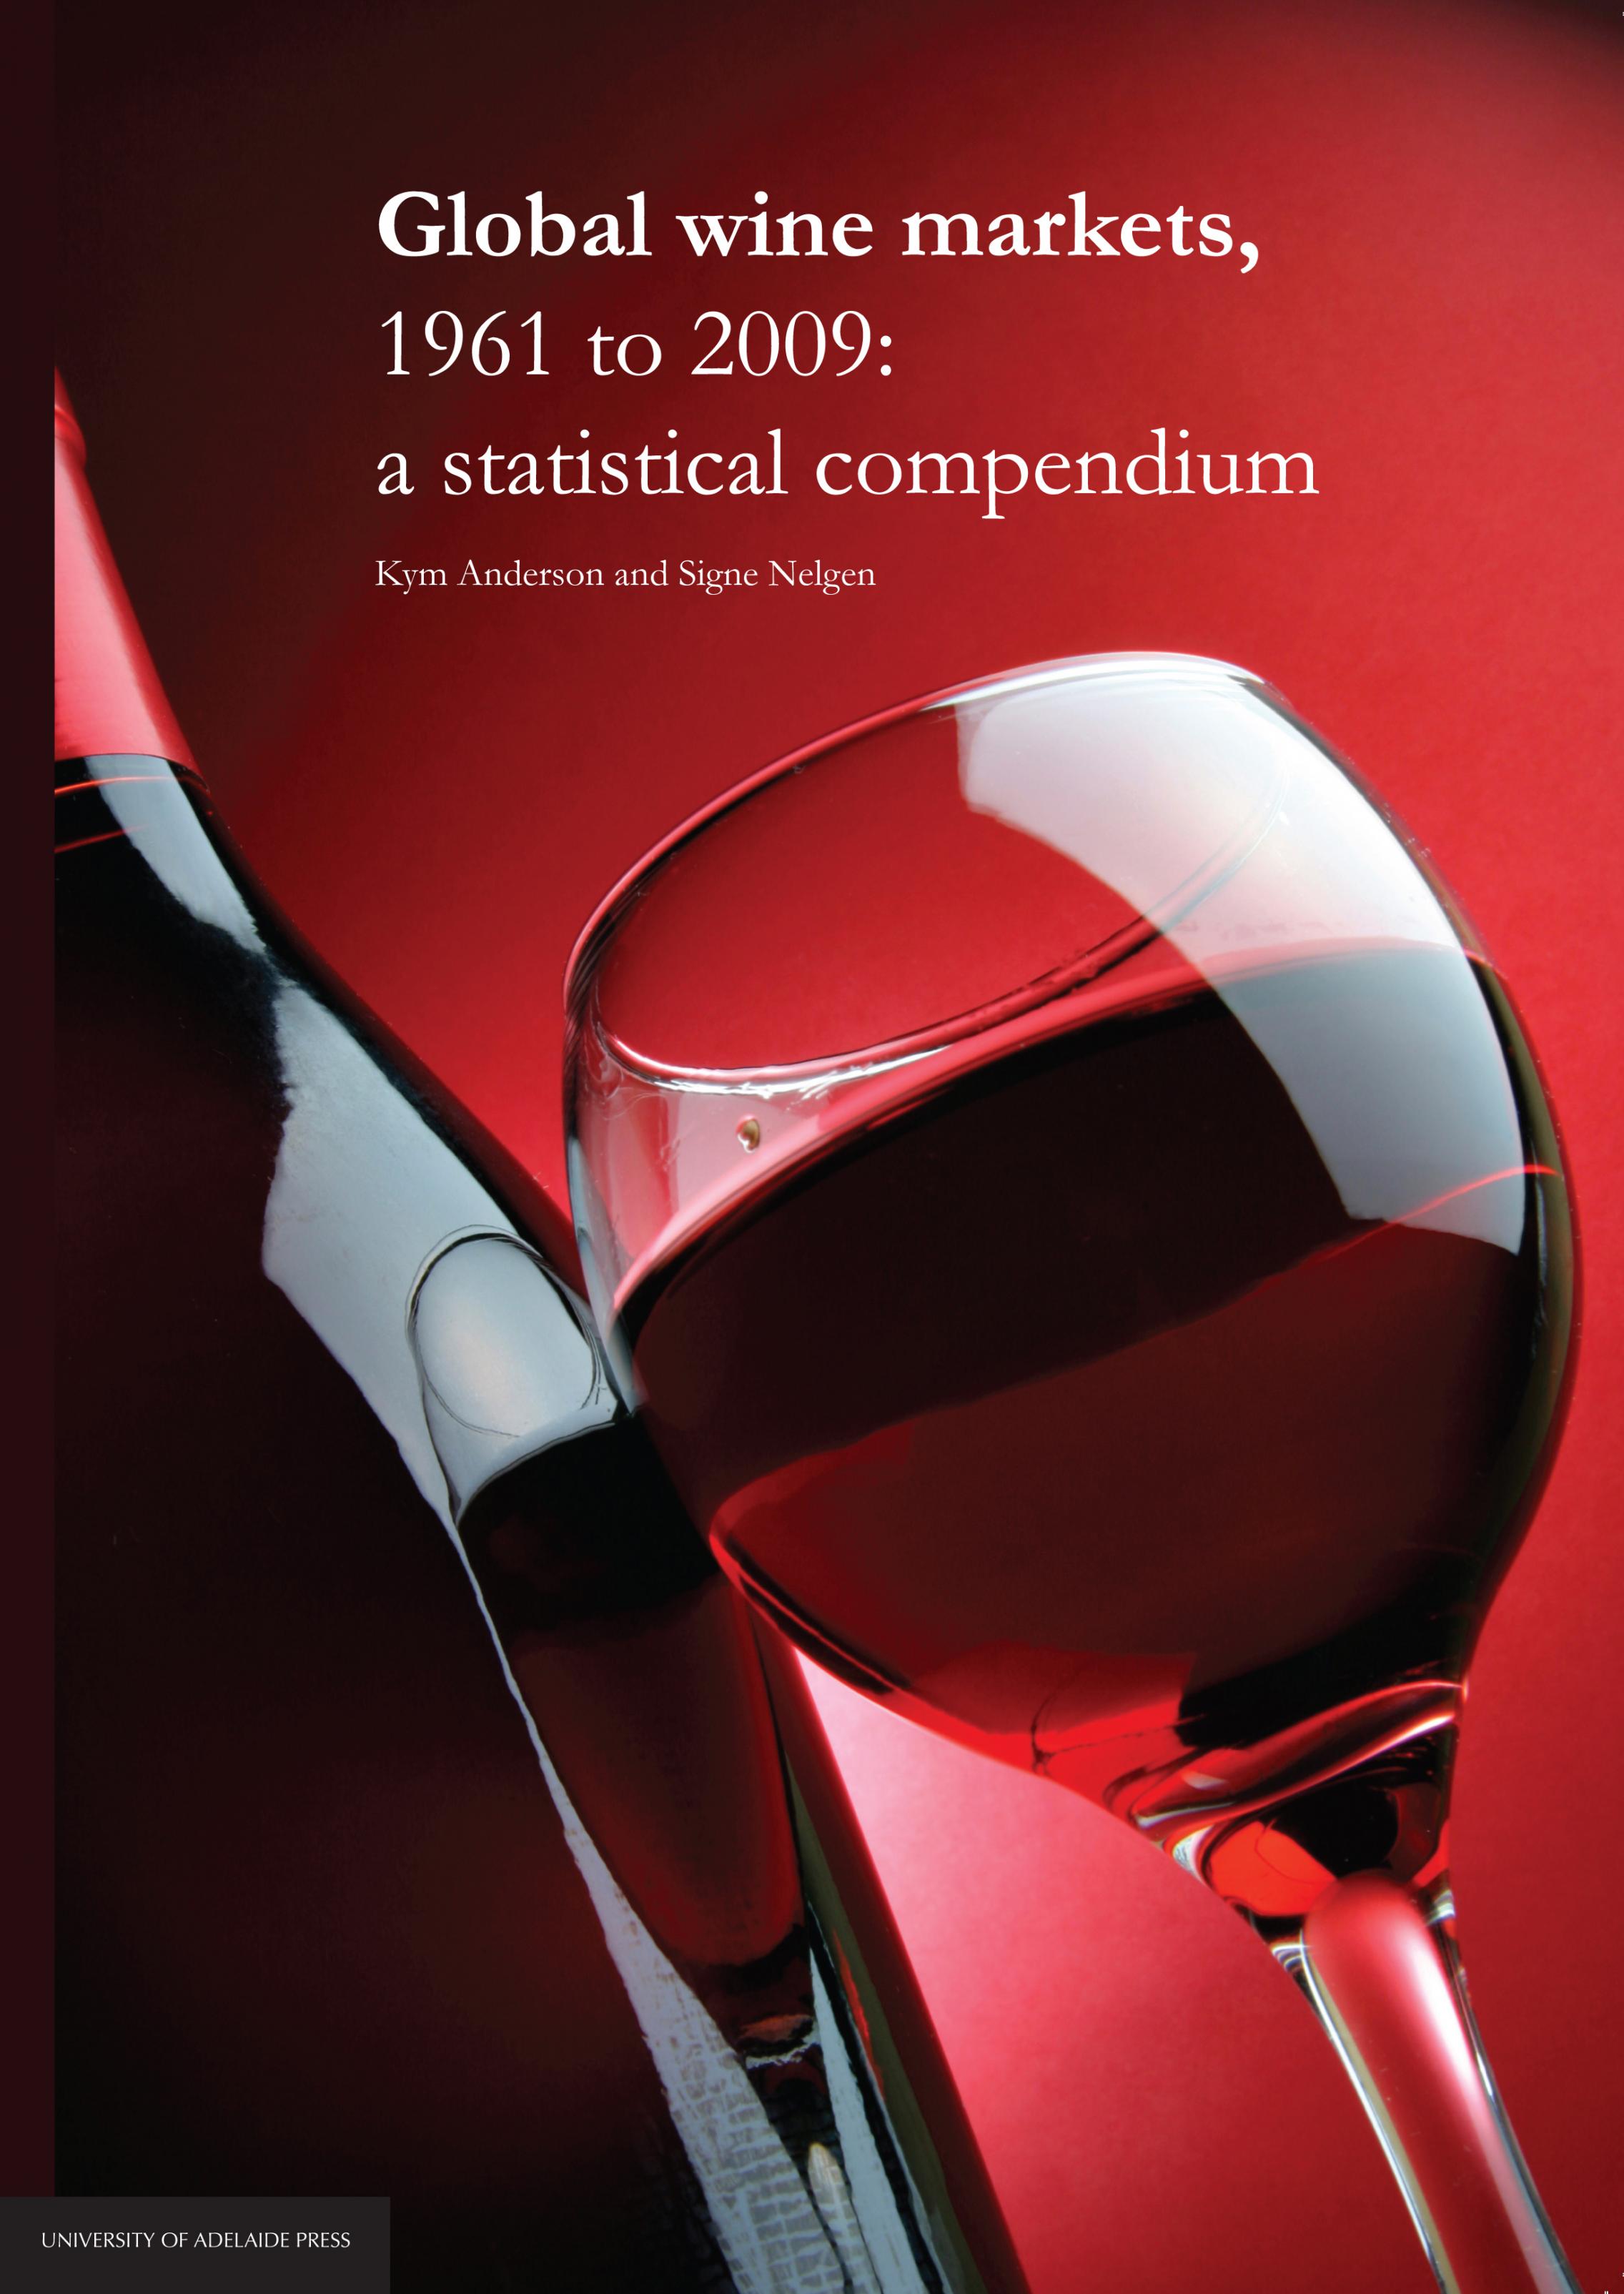 Global wine markets 2009 cover